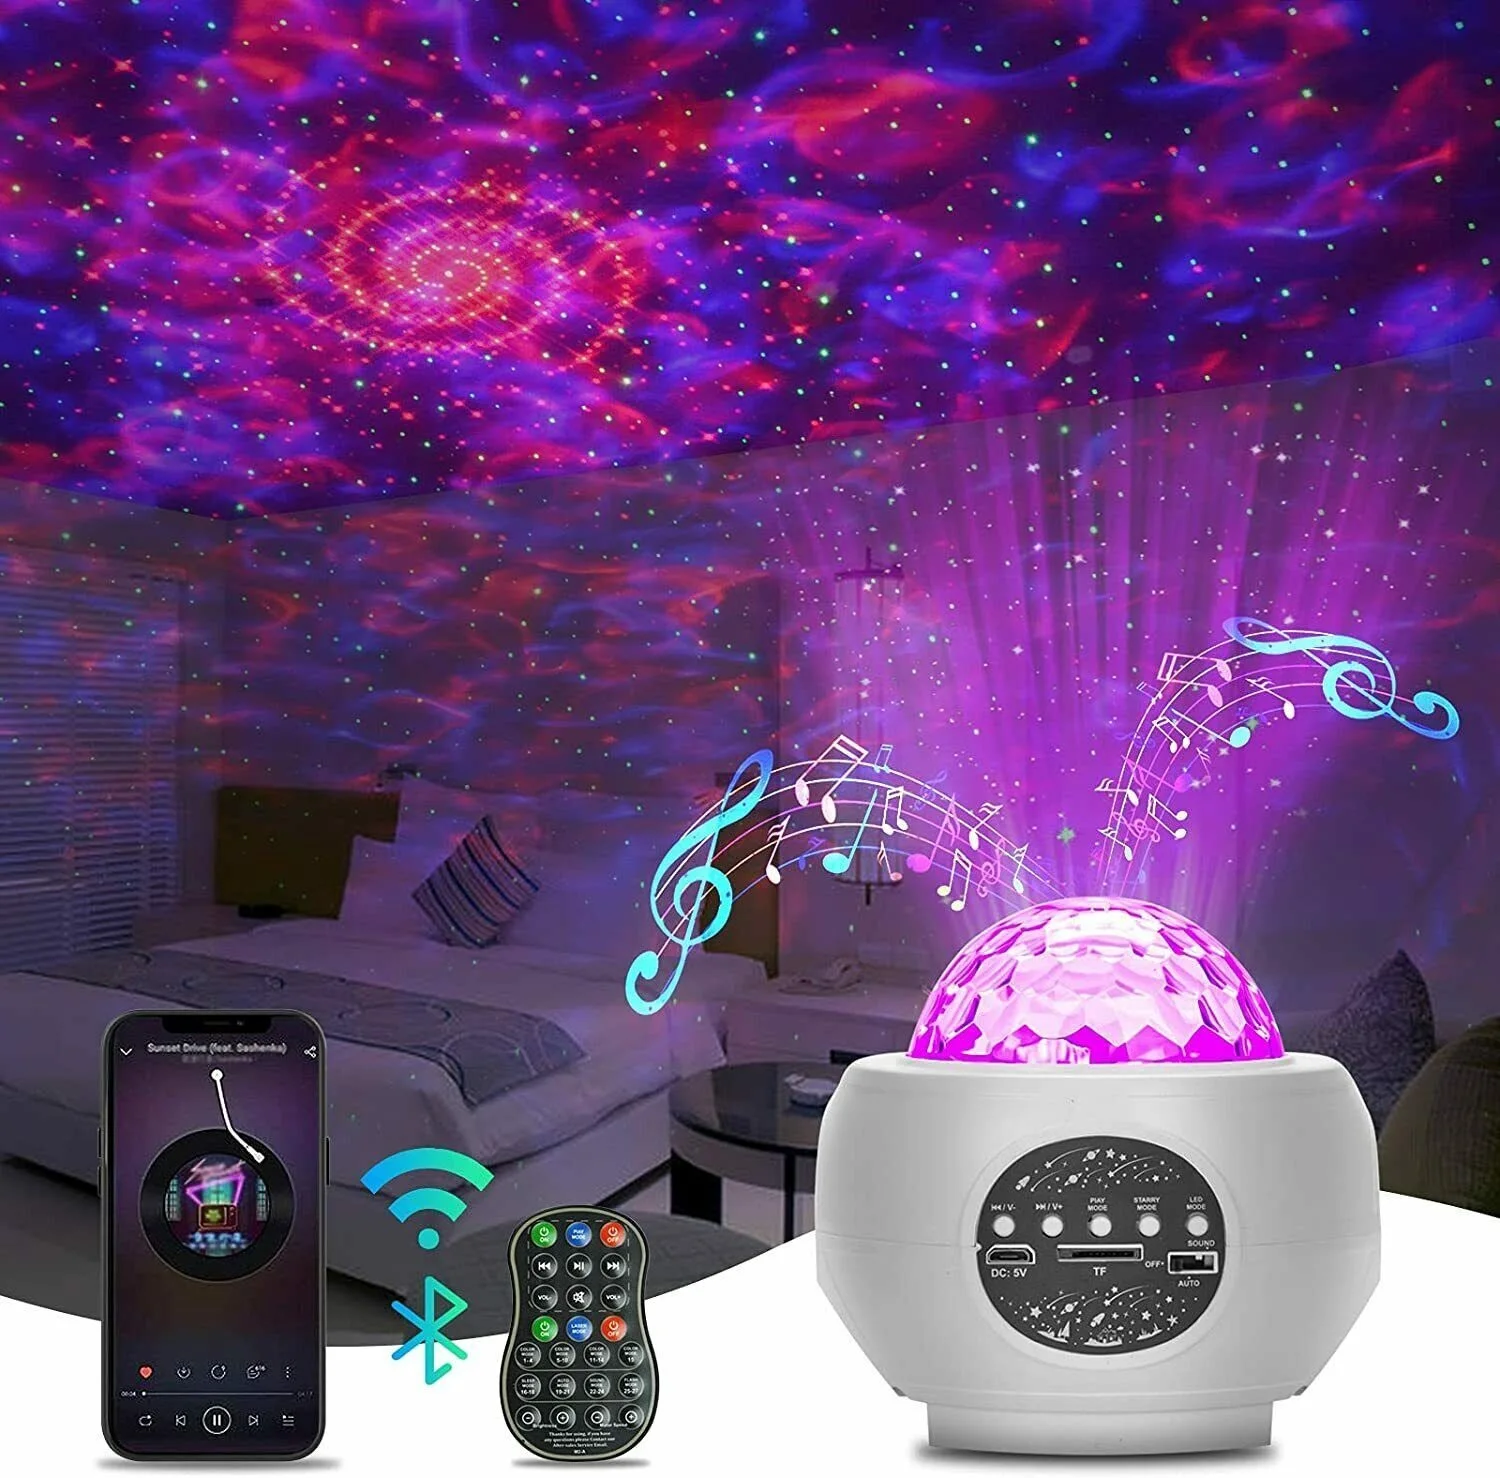 LED Galaxy Starry Night Light Projector Ocean Star Sky Party Lamp Party Bedroom 